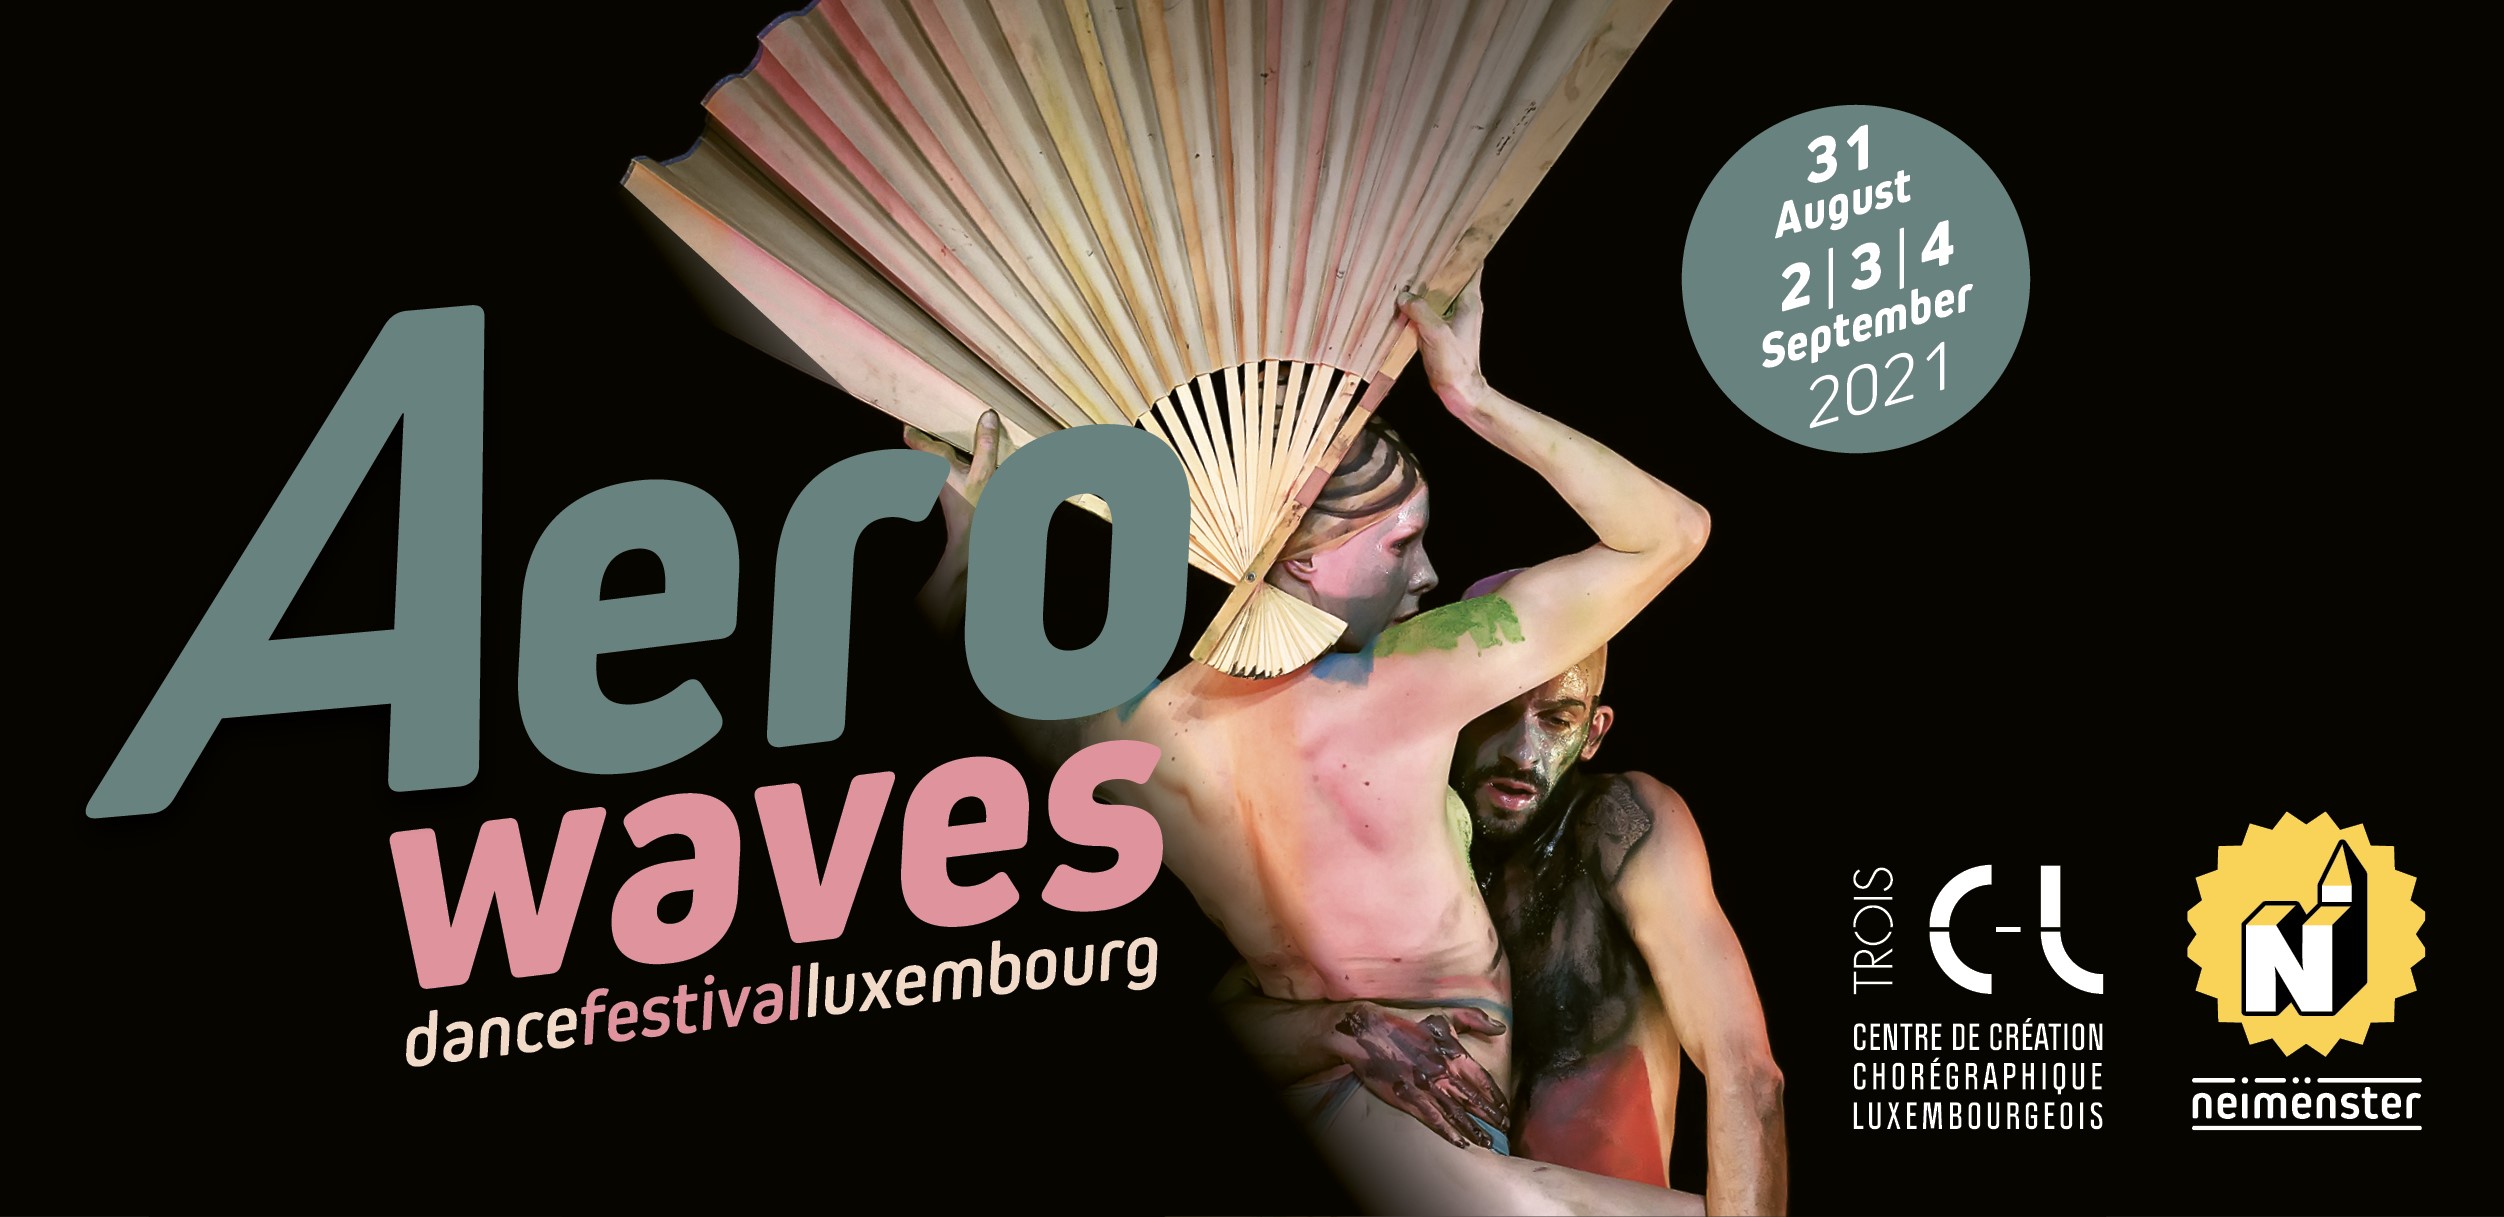 Aerowaves Dance Festival Luxembourg, a positive result for the Luxembourg scene.